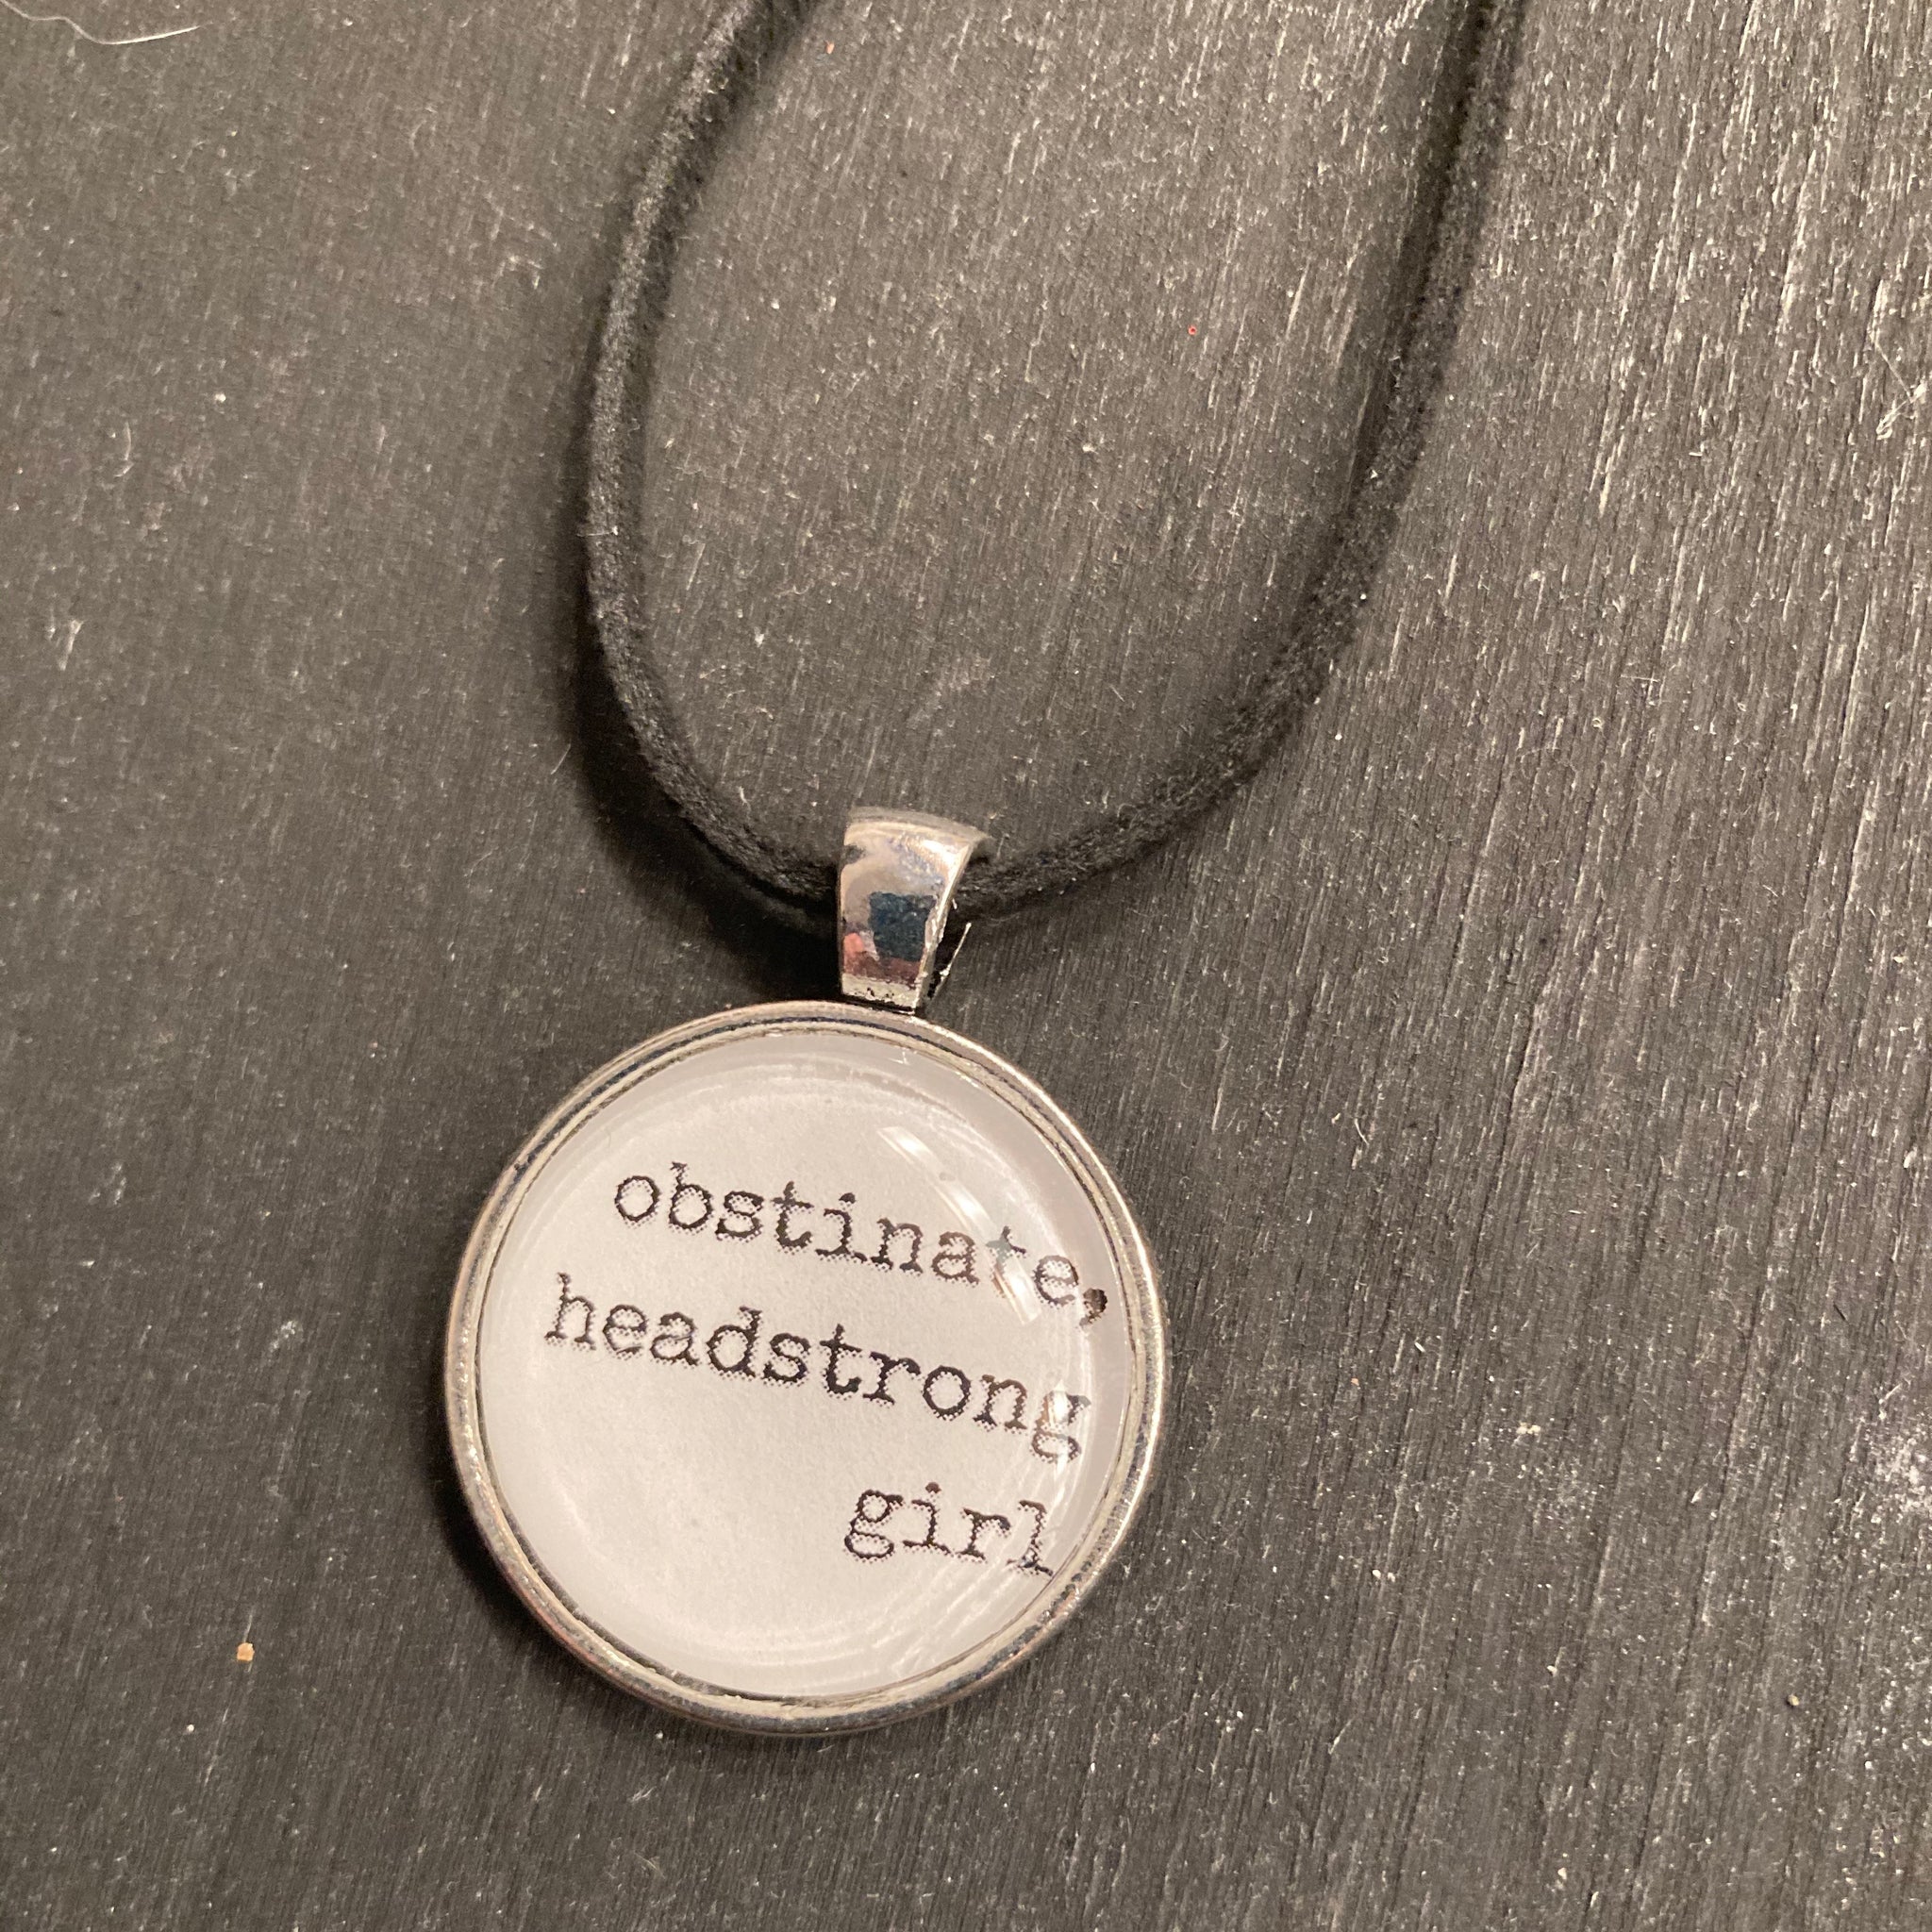 Necklace - Obstinate, Headstrong Girl